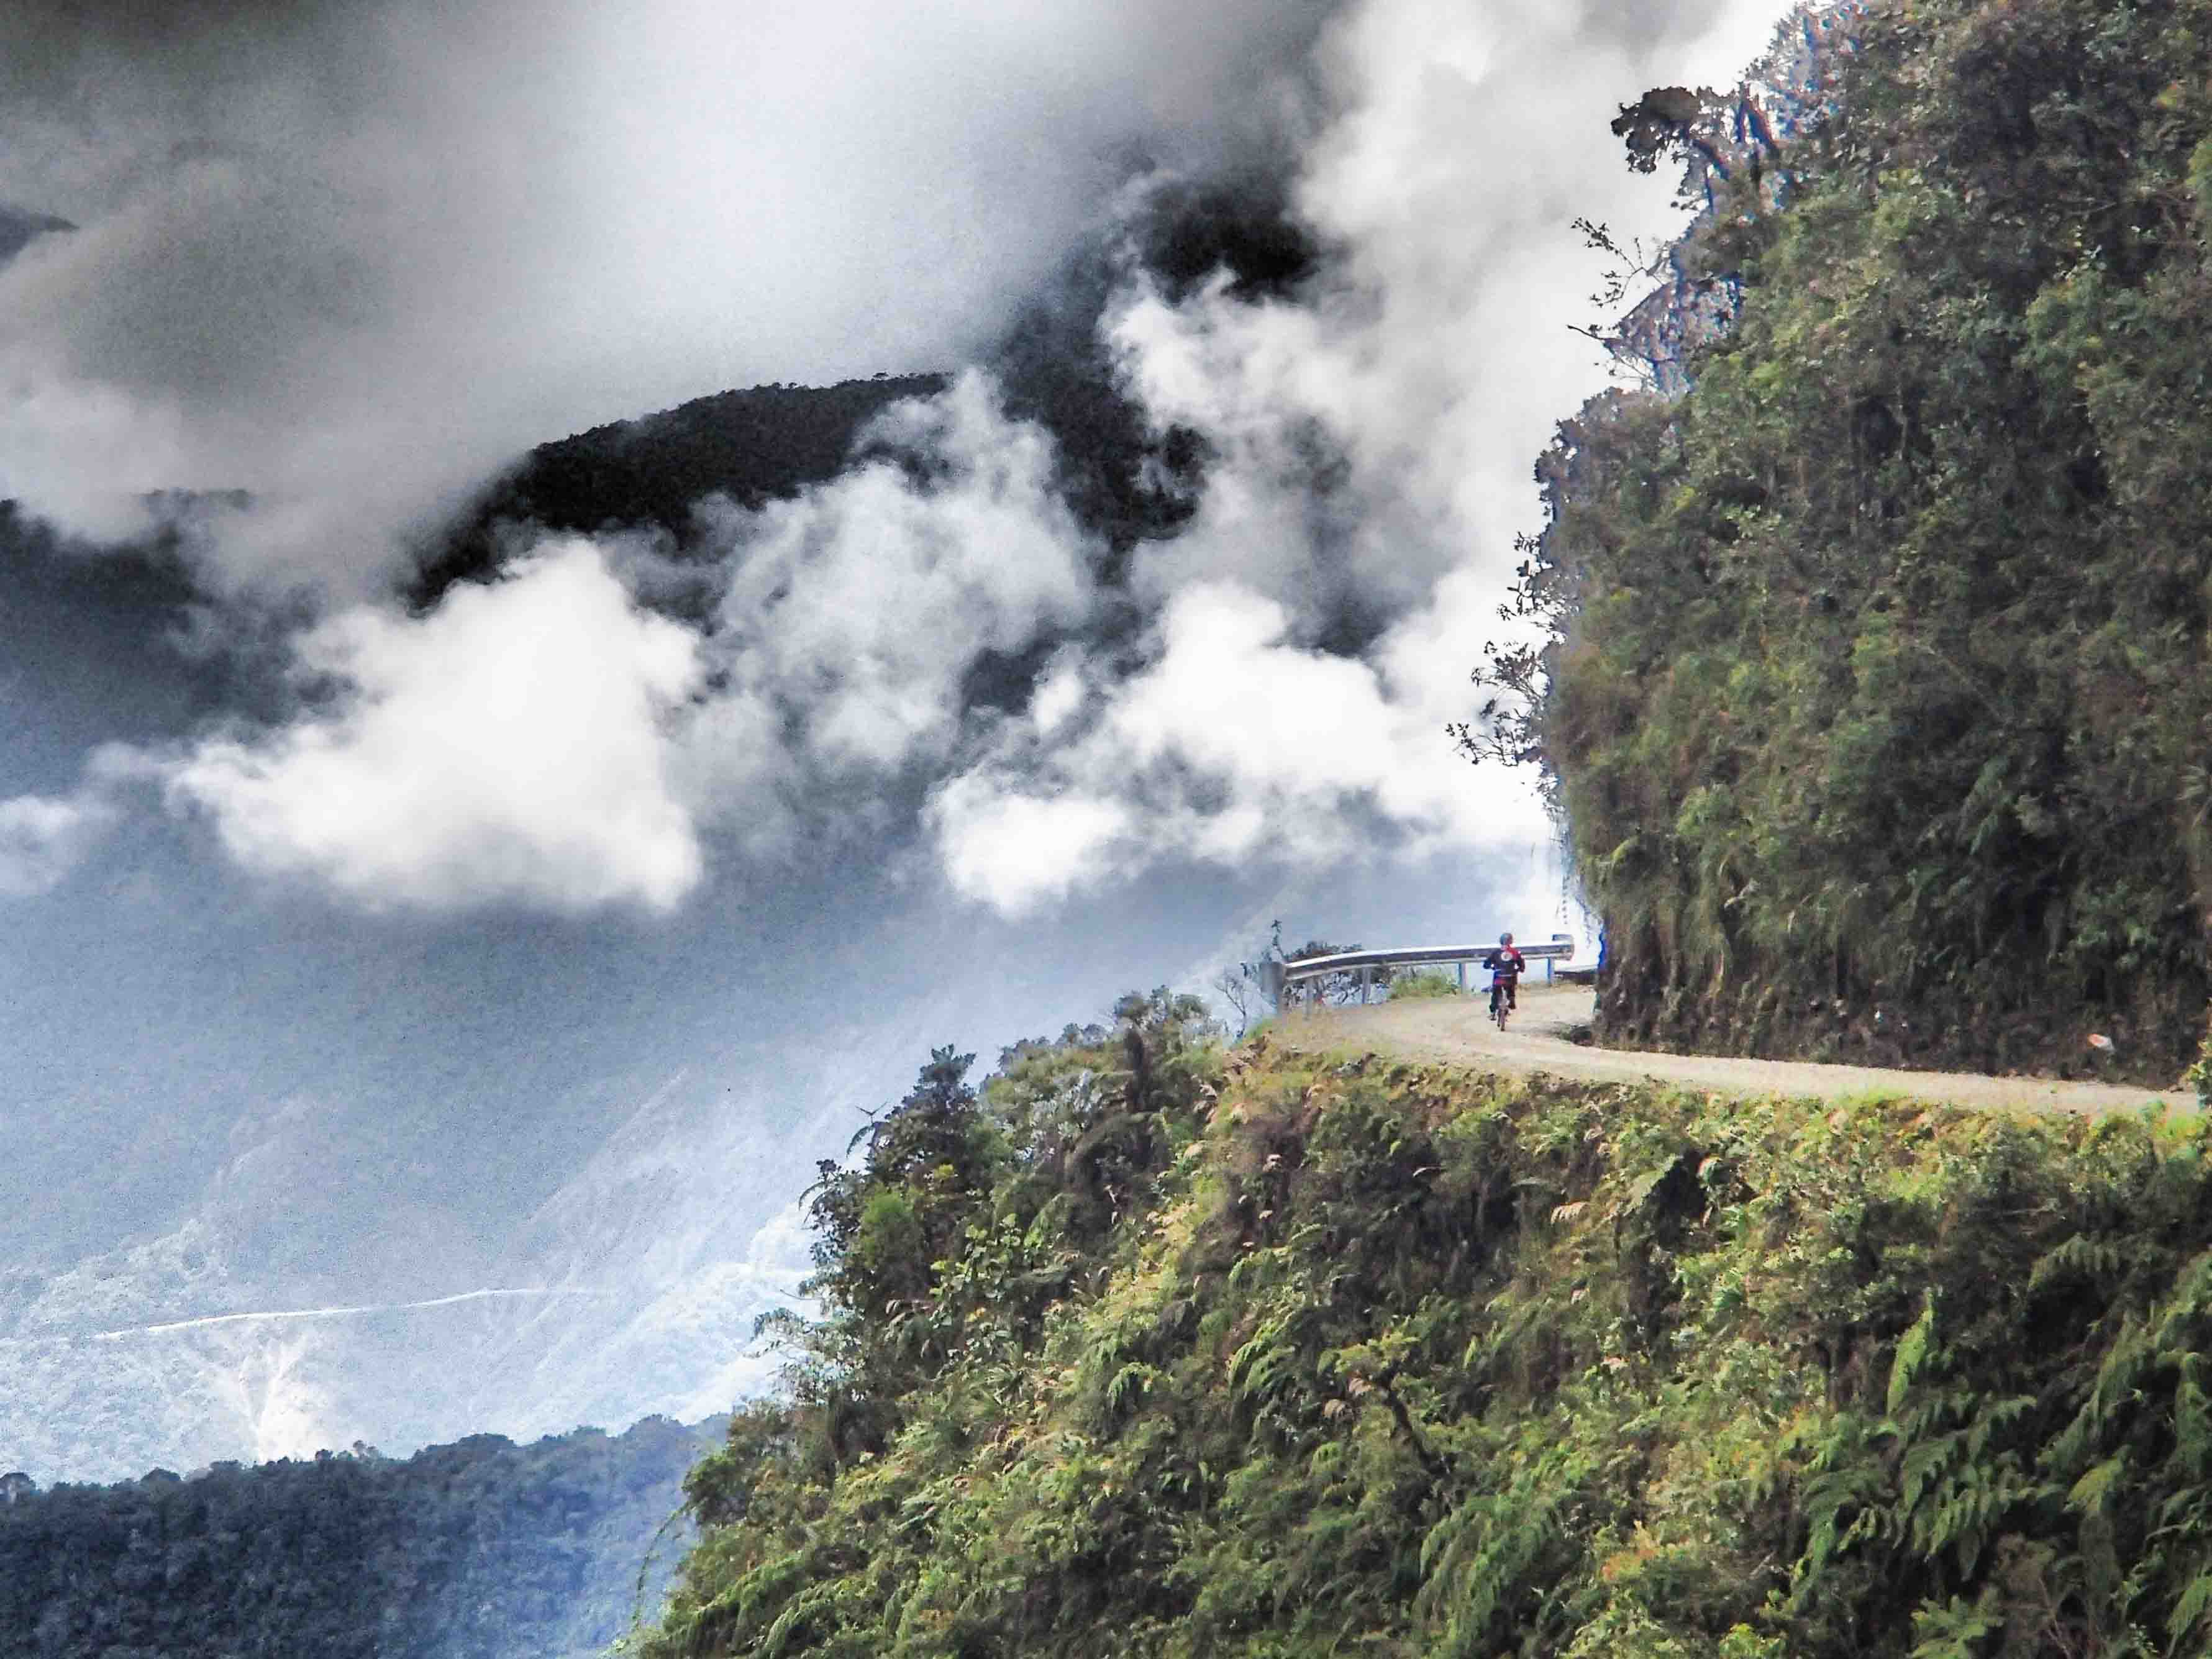 riding a bike on the most dangerous road in the world